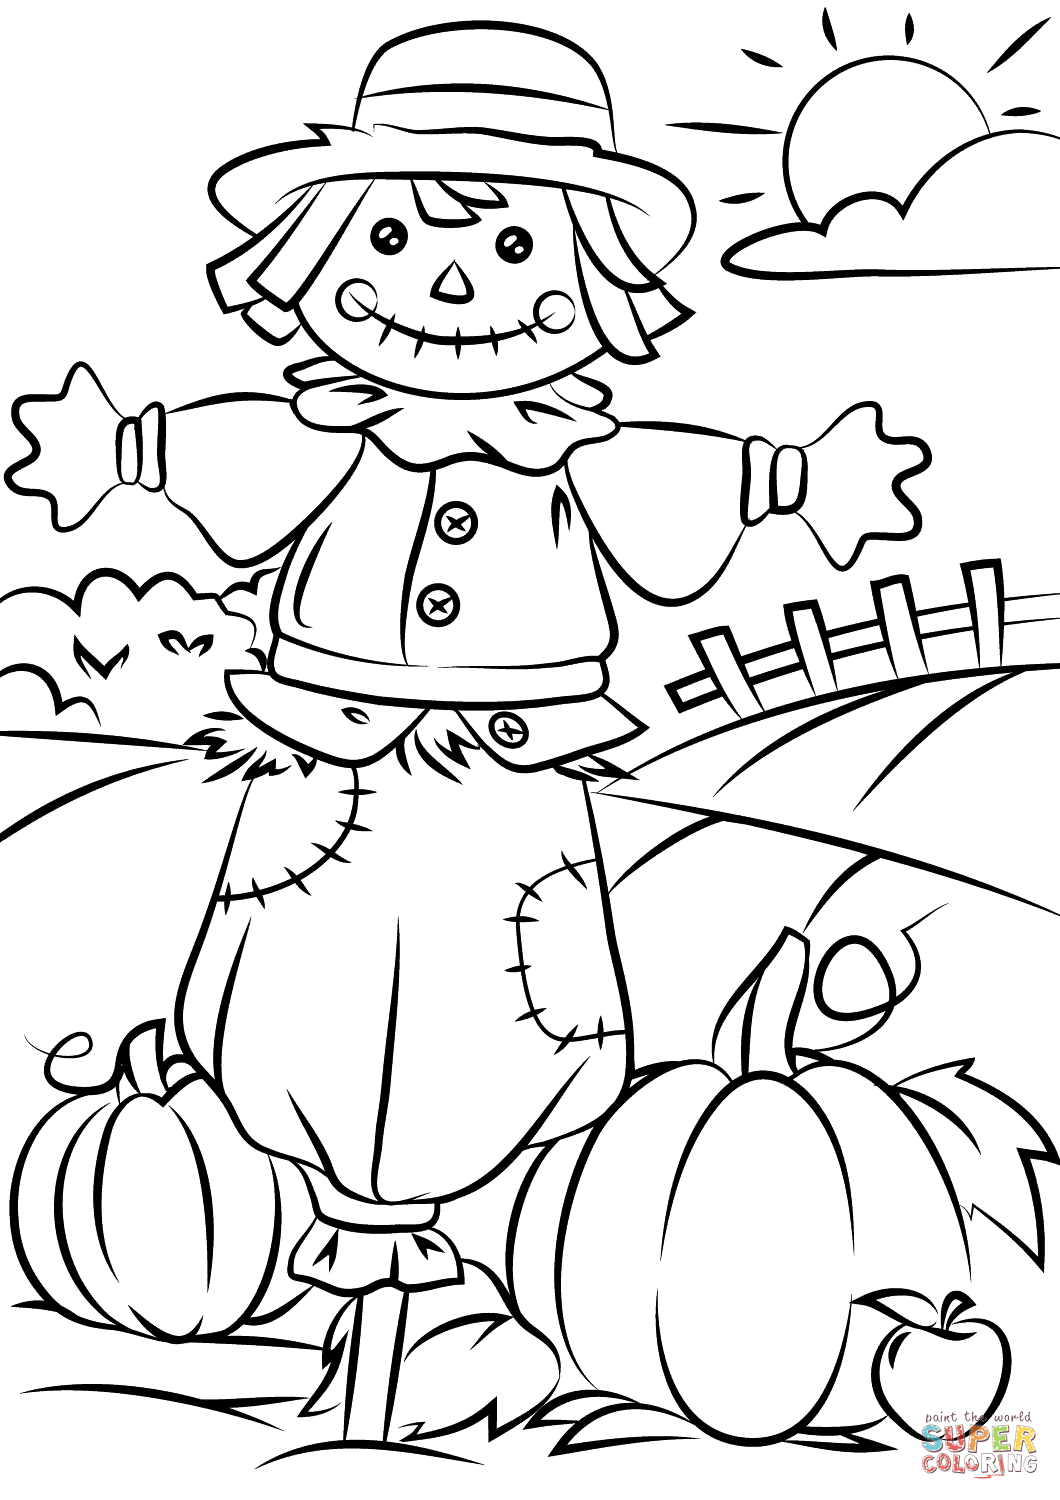 Autumn scene with scarecrow coloring page free printable coloring pages